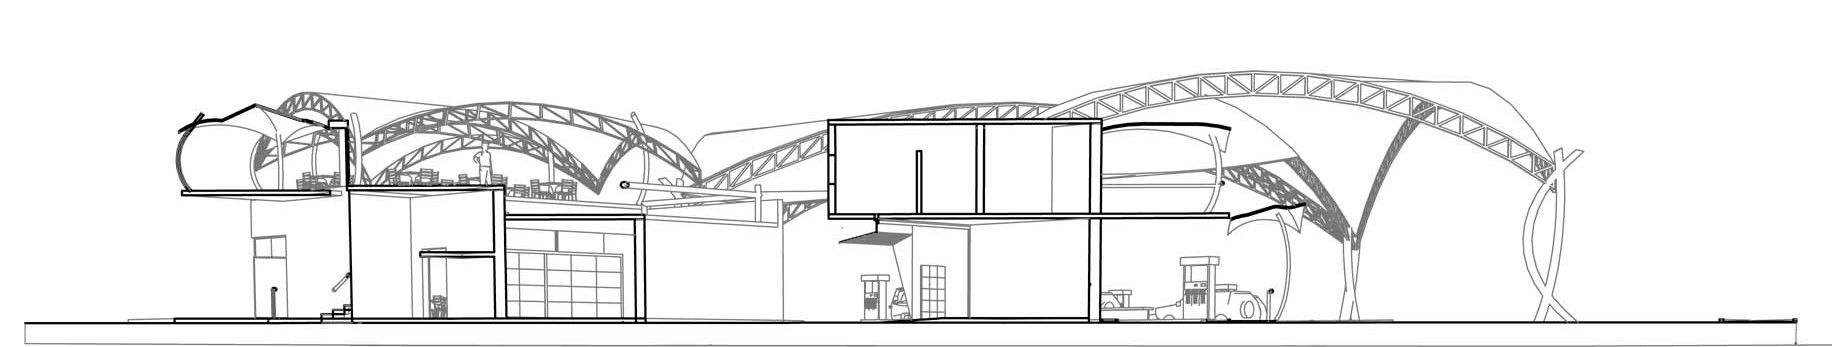 Sectional Elevation of a Building